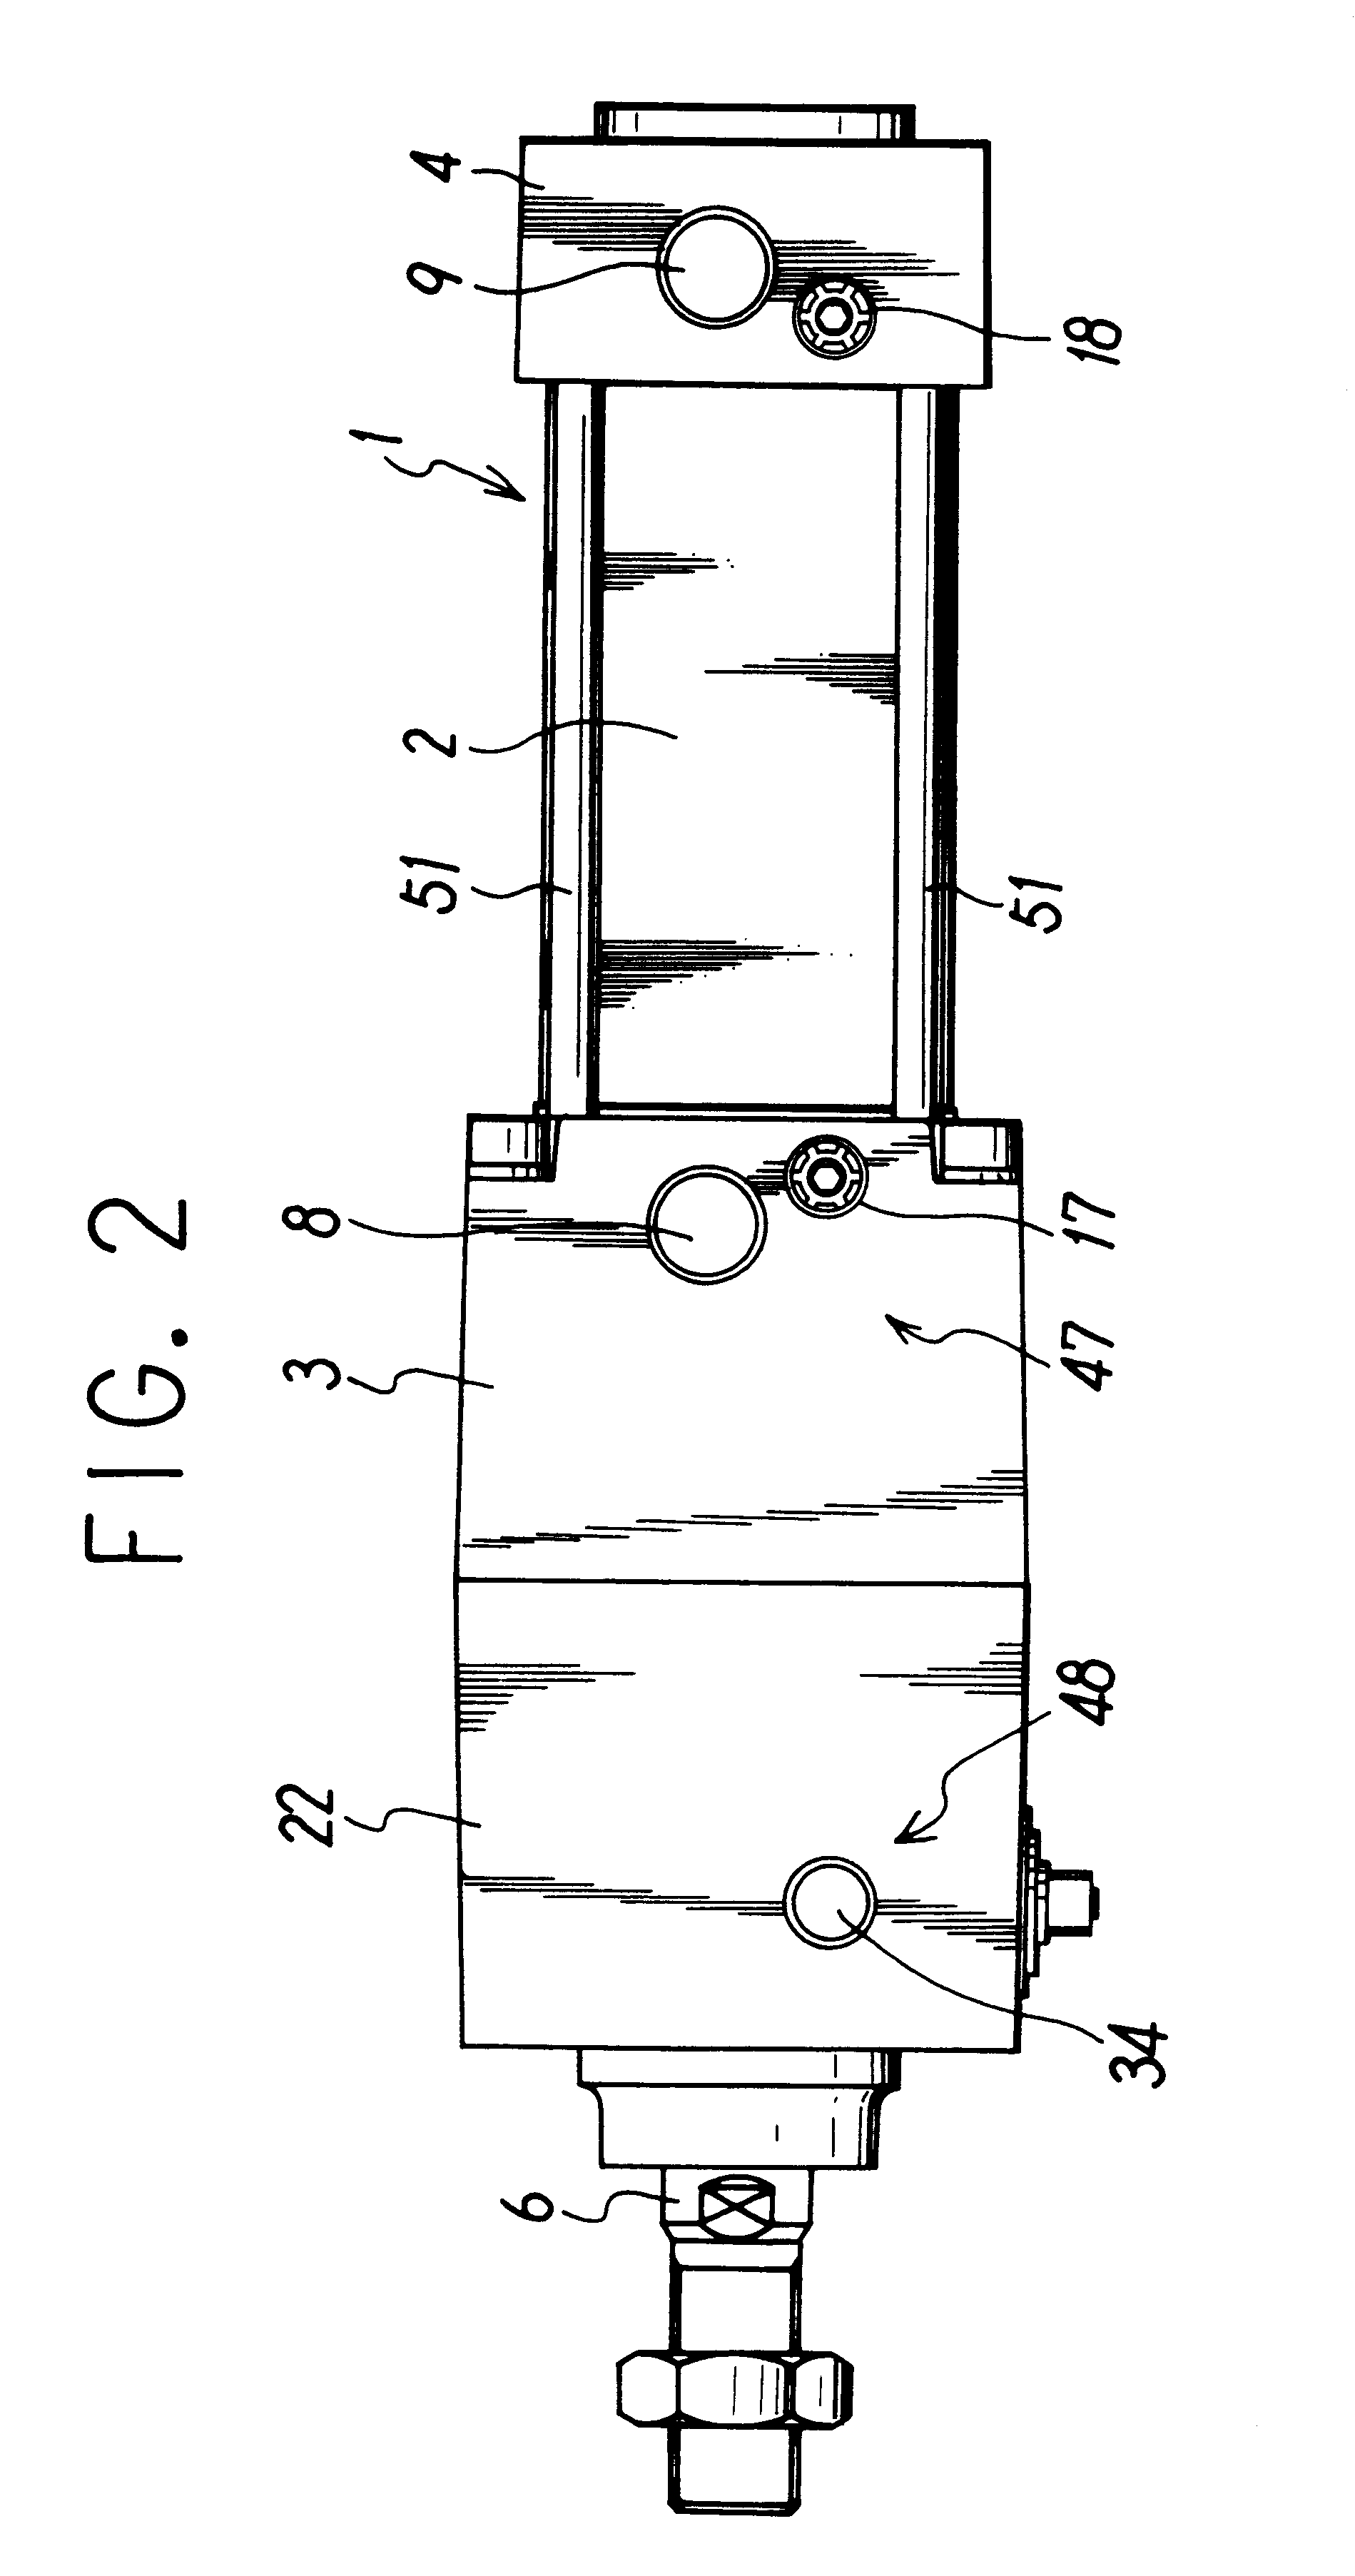 Fluid pressure cylinder with a lock mechanism